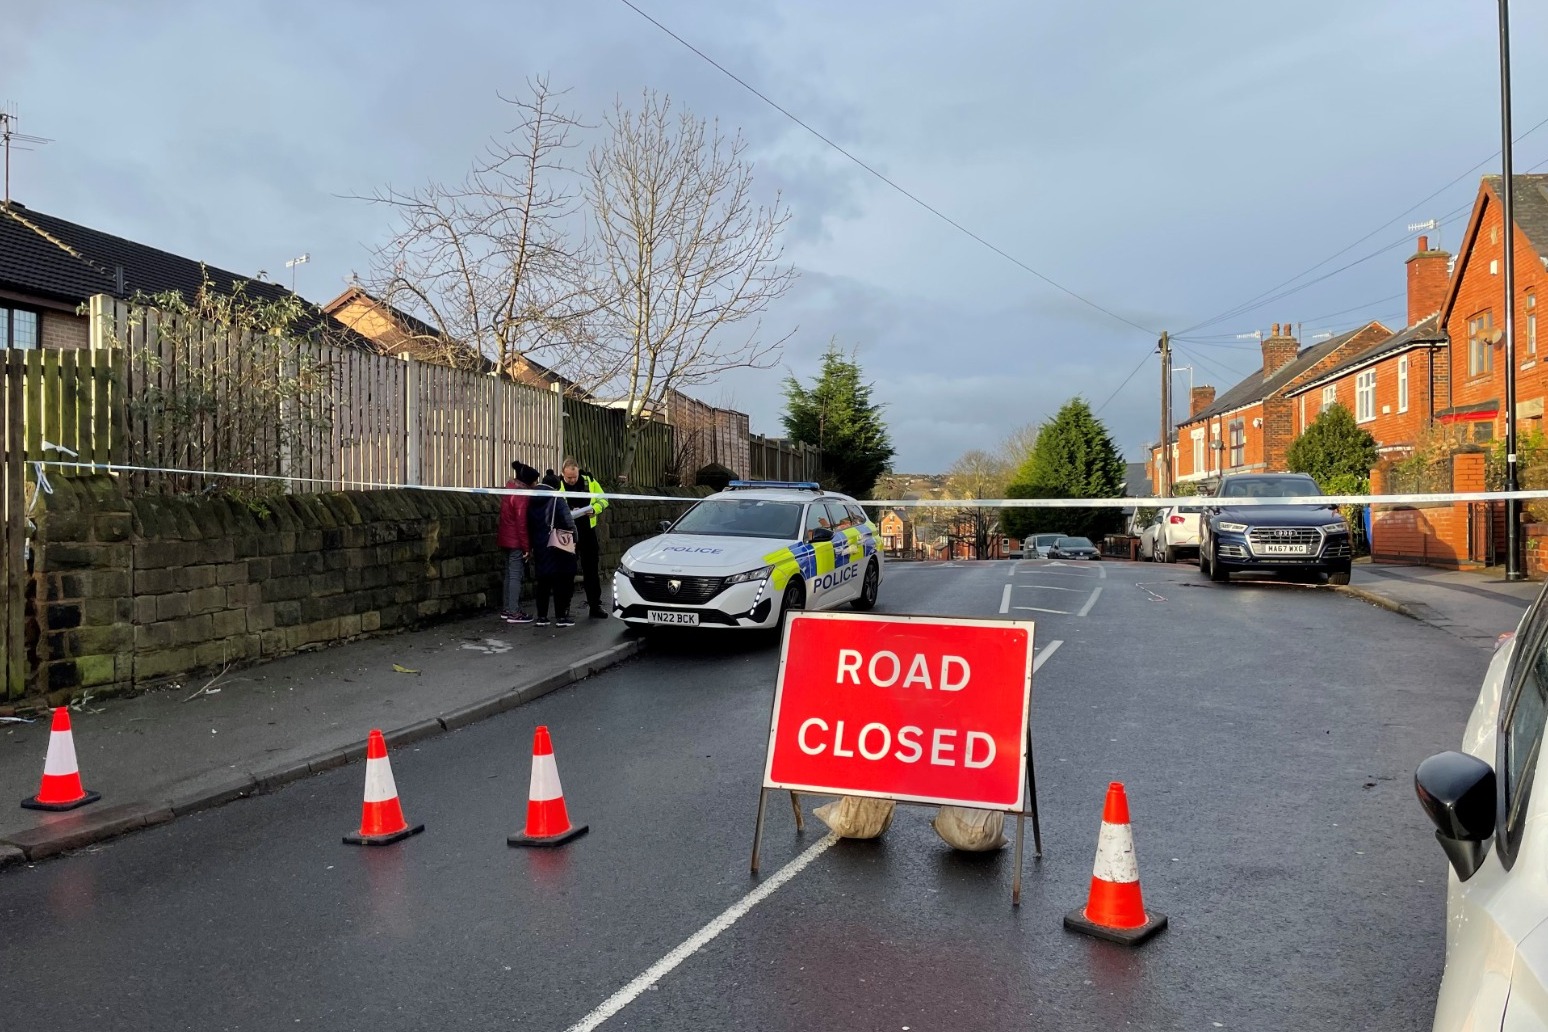 Murder probe after man killed as car ploughs into crowd during disturbance 